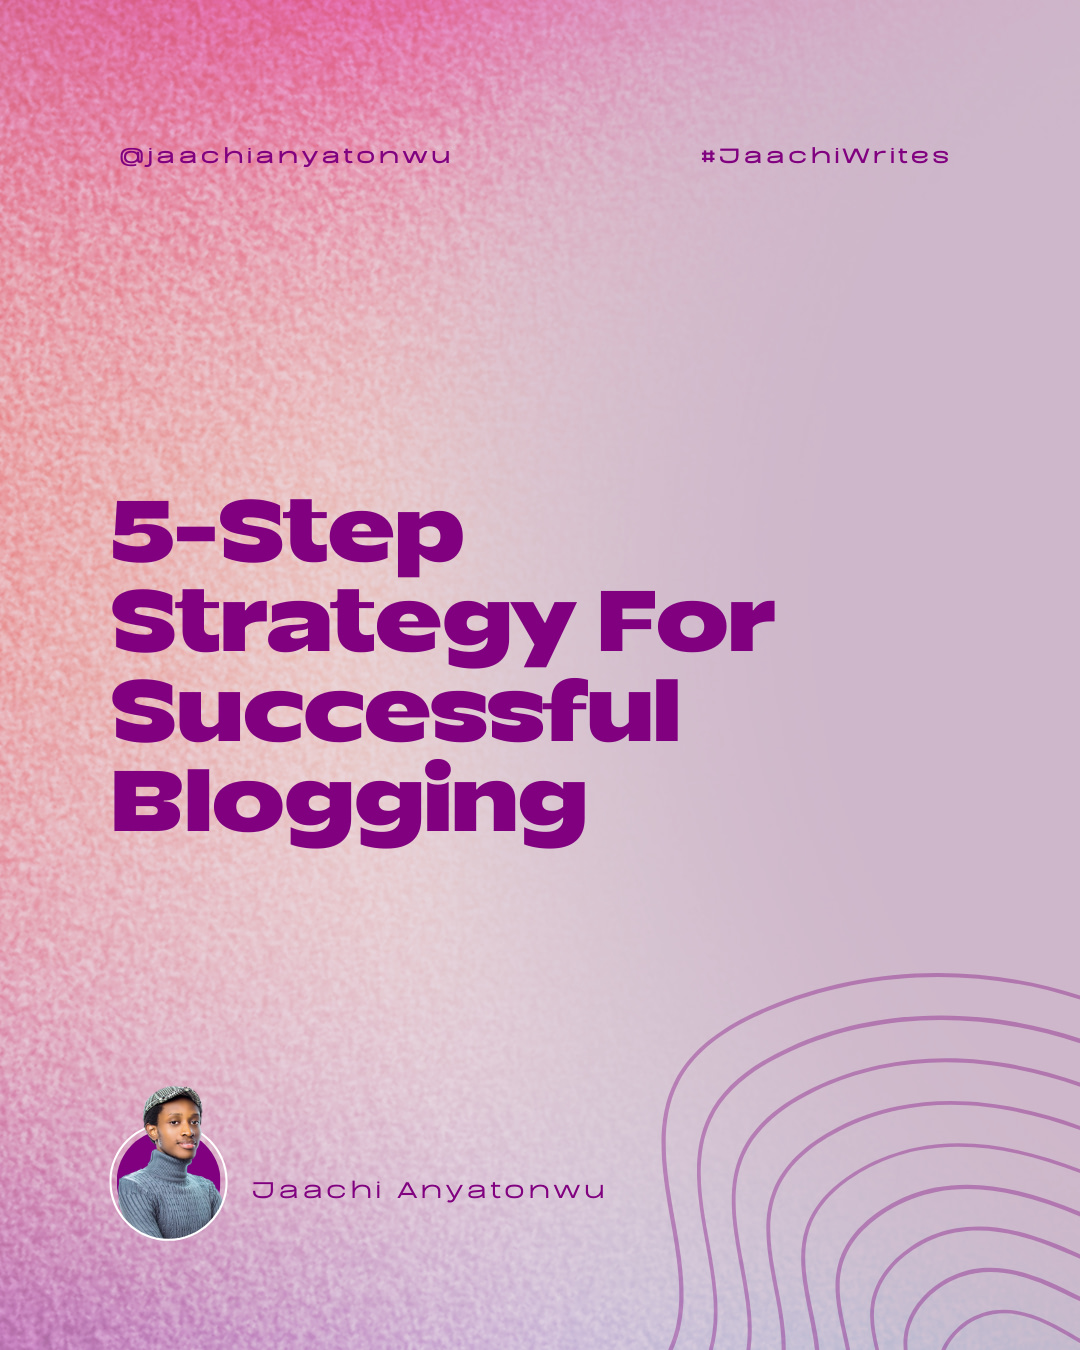 How to Start and Grow a Successful Blog in 5 Easy Steps